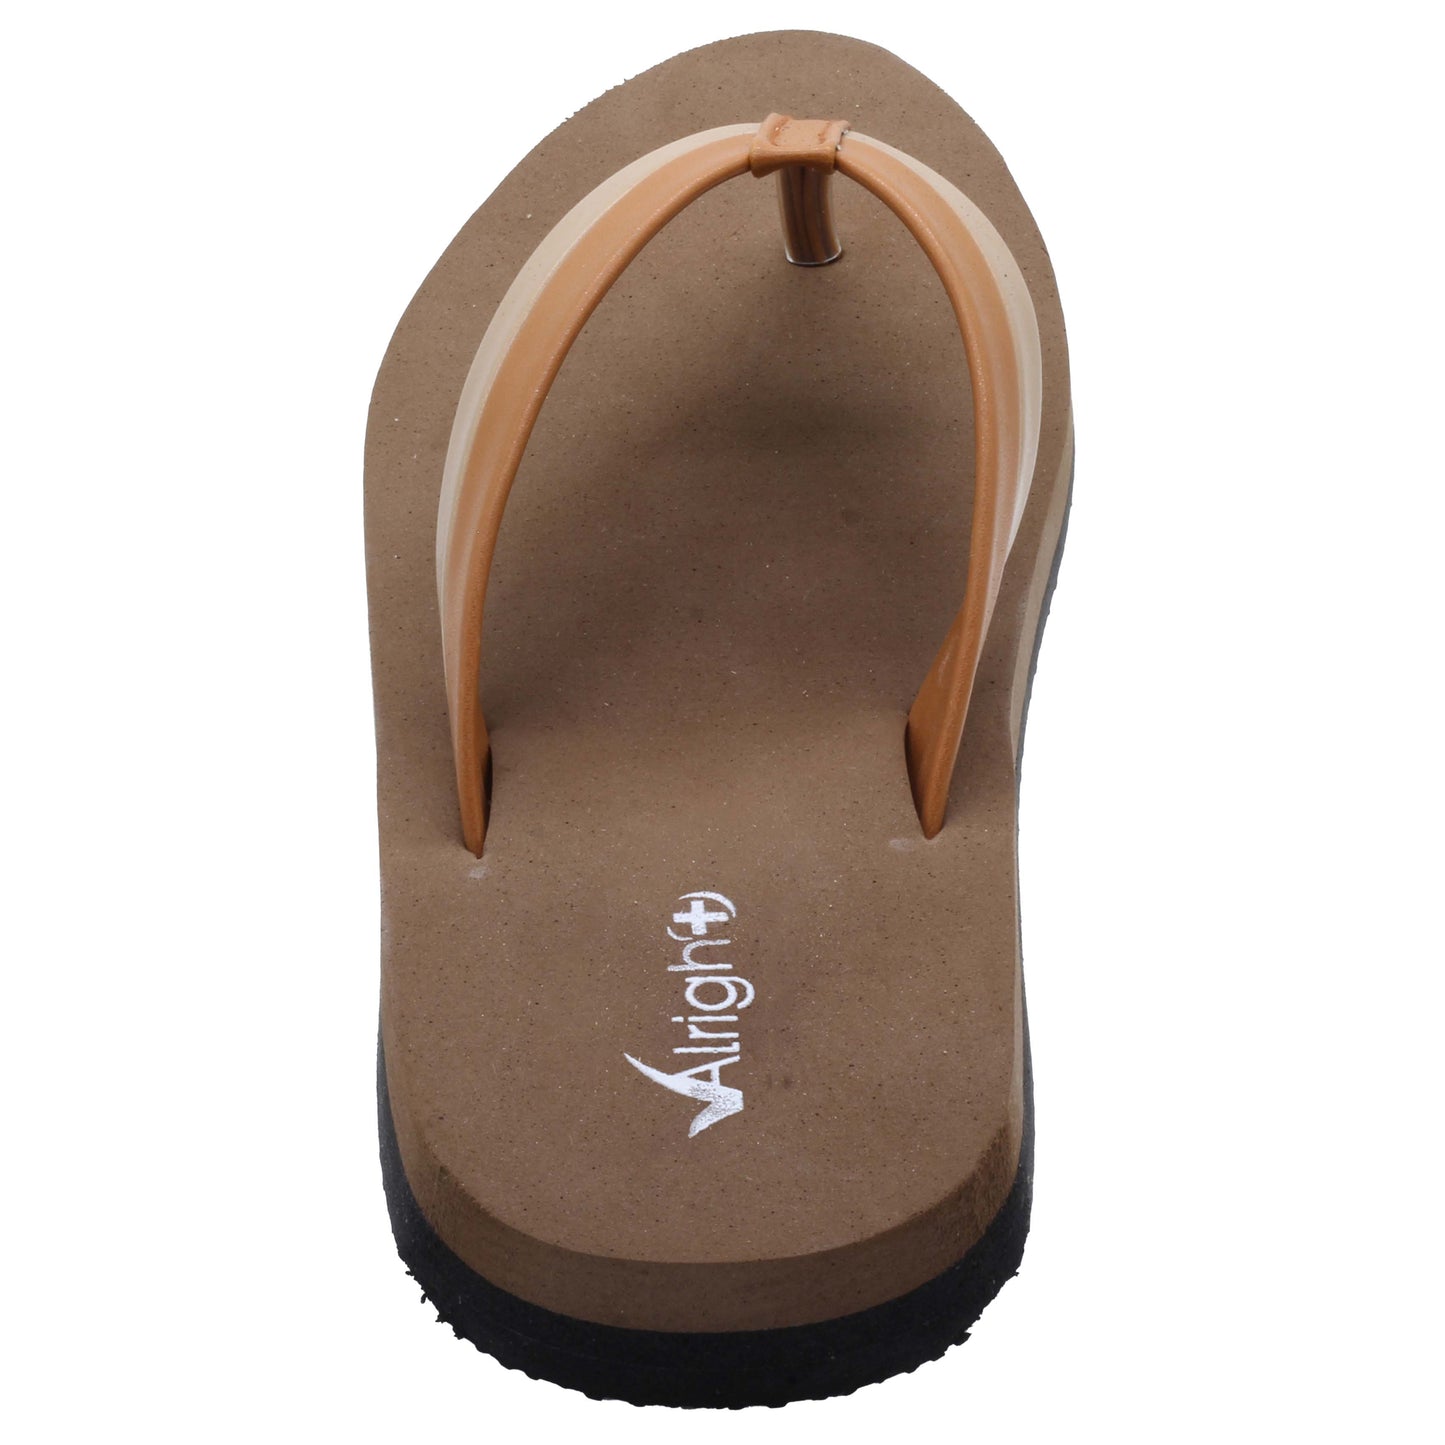 Alright Womens Diabetic and Ortho Care Soft MCP Slipper G 19